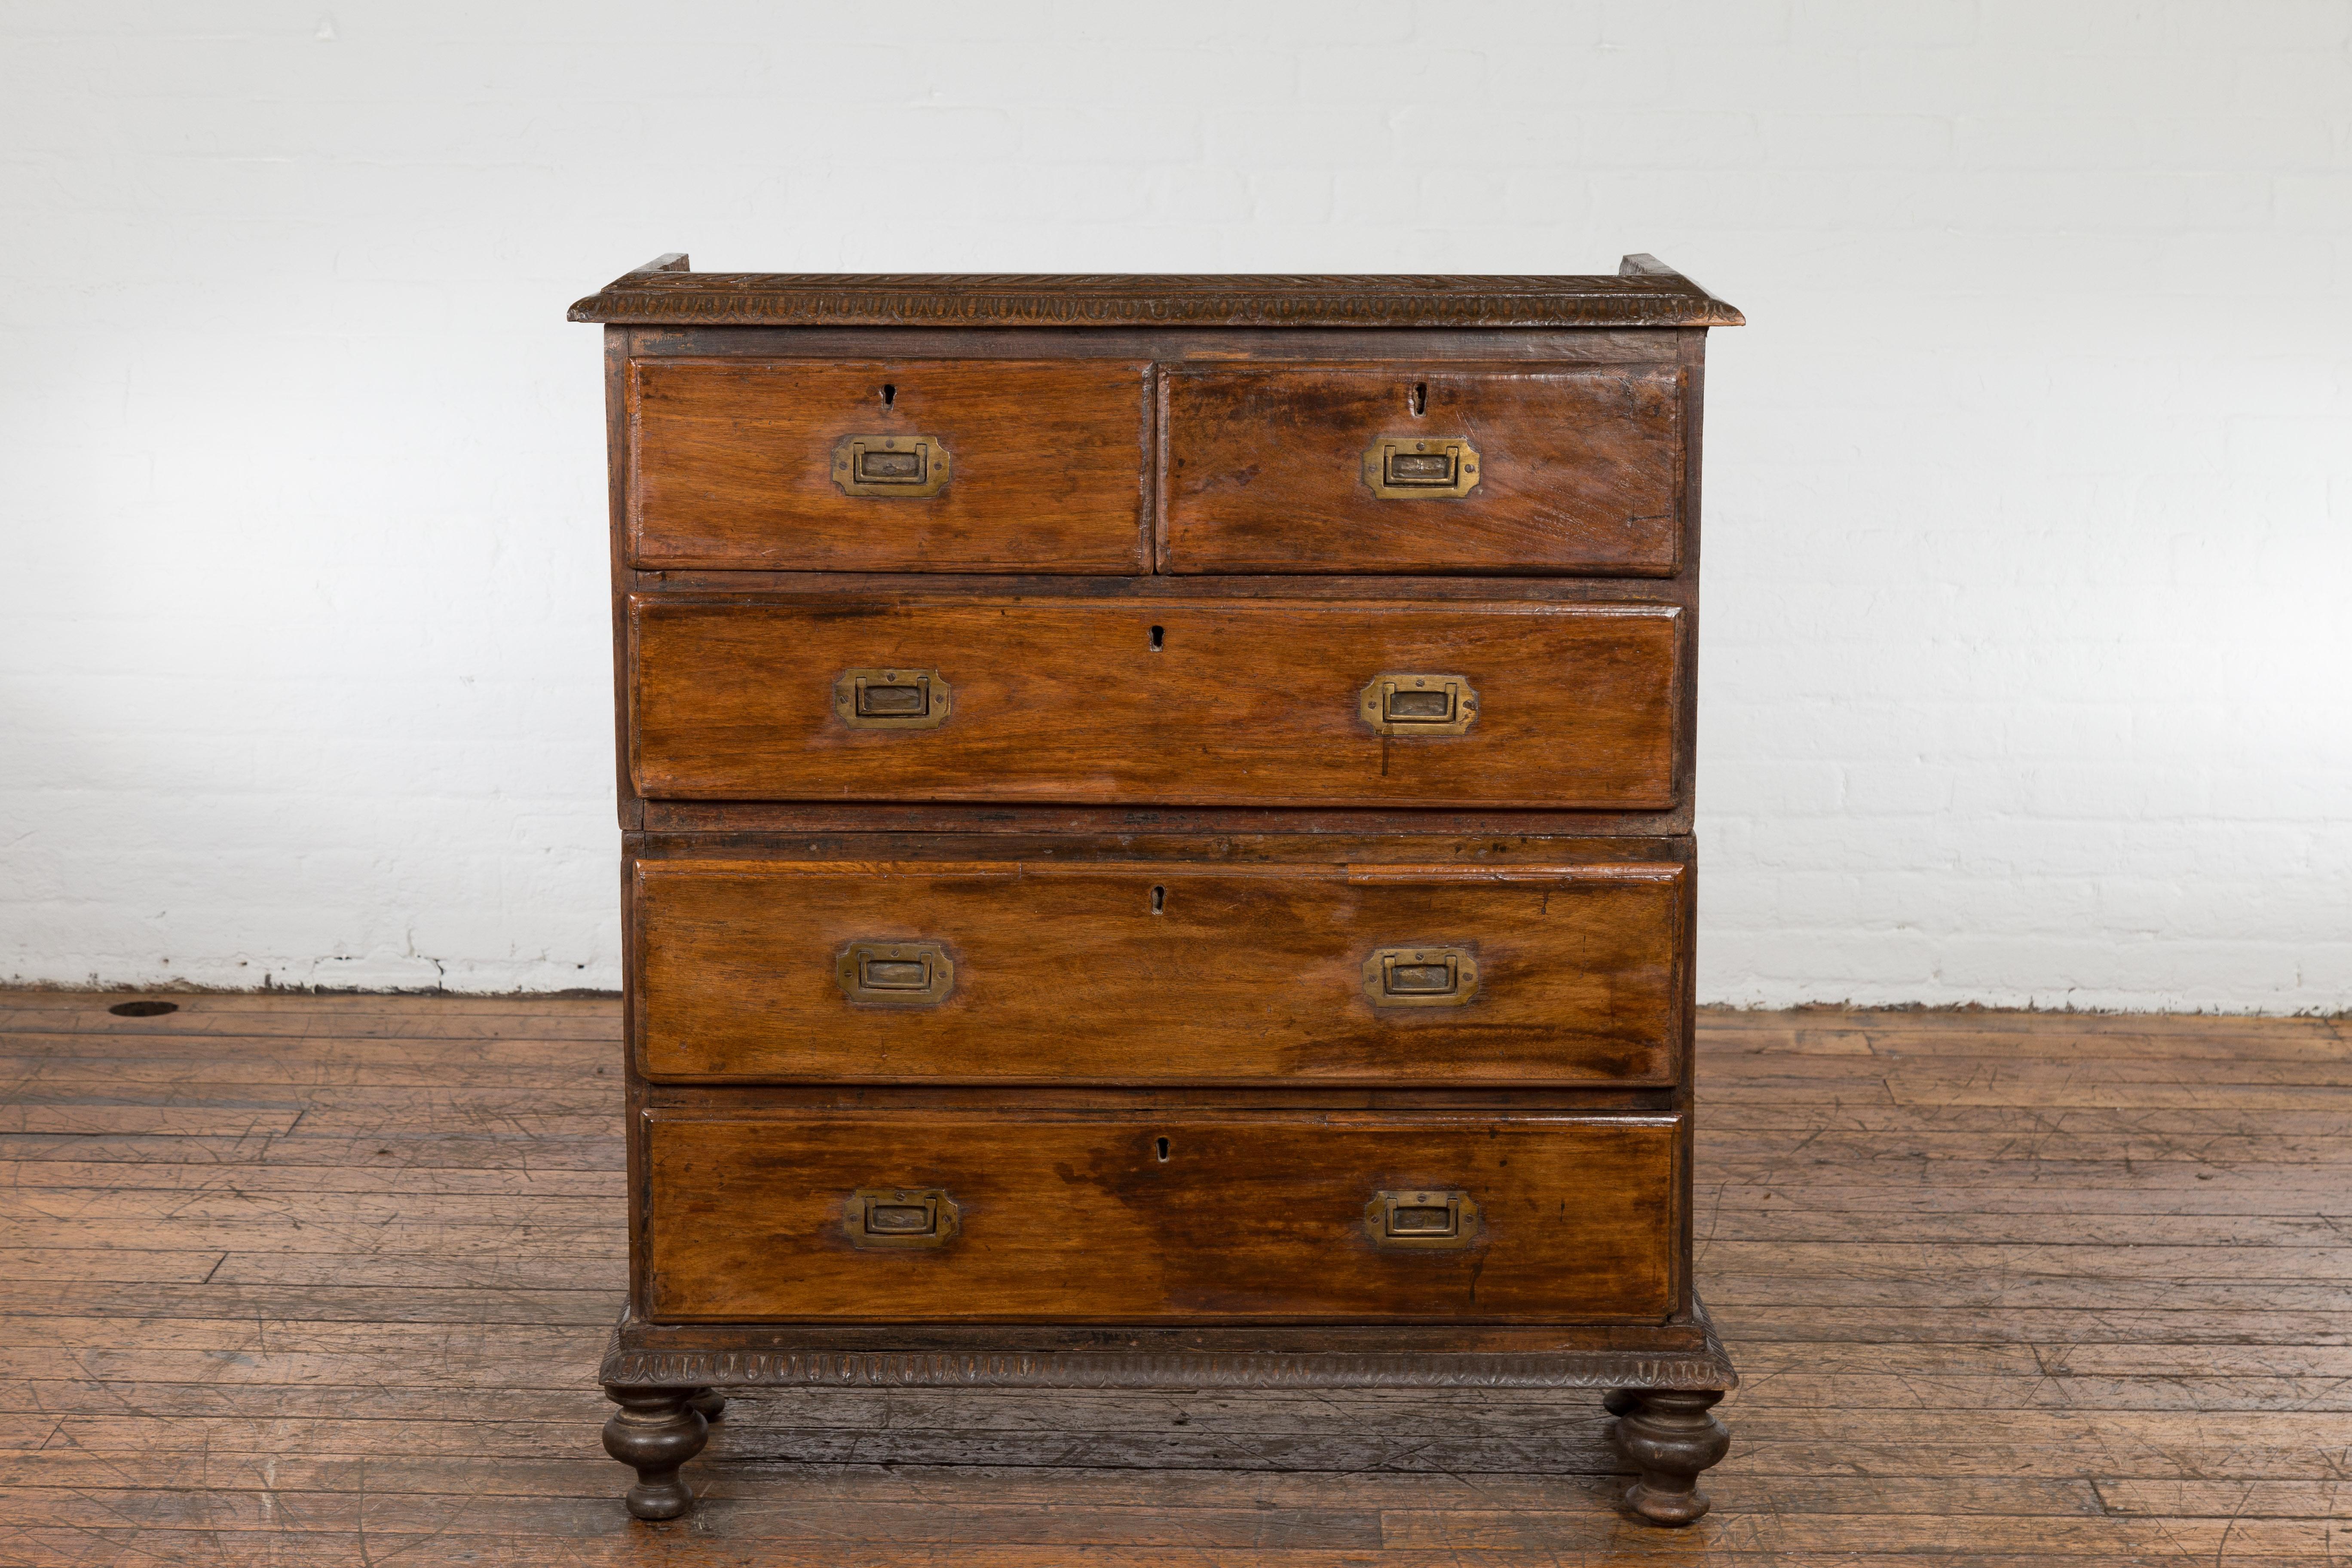 An antique Indian two-part chest from the 19th century with five drawers, linear brass hardware and turned feet. Emanate a sense of simple elegance in your interior space with this 19th-century Indian two-part chest. Crafted with exactitude and